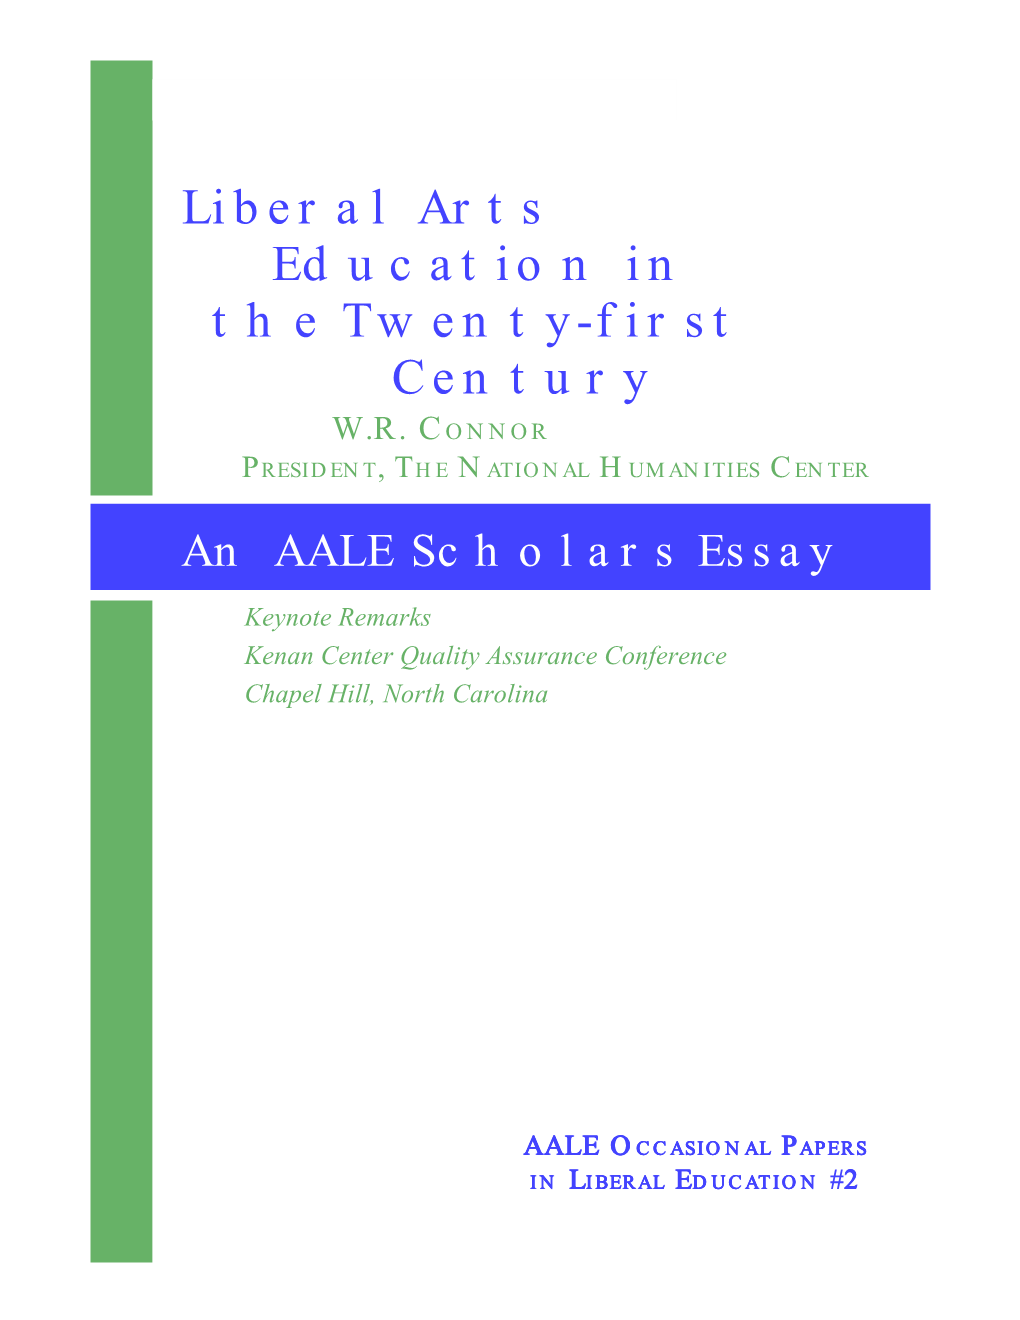 Liberal Arts Education in the Twenty-First Century W.R